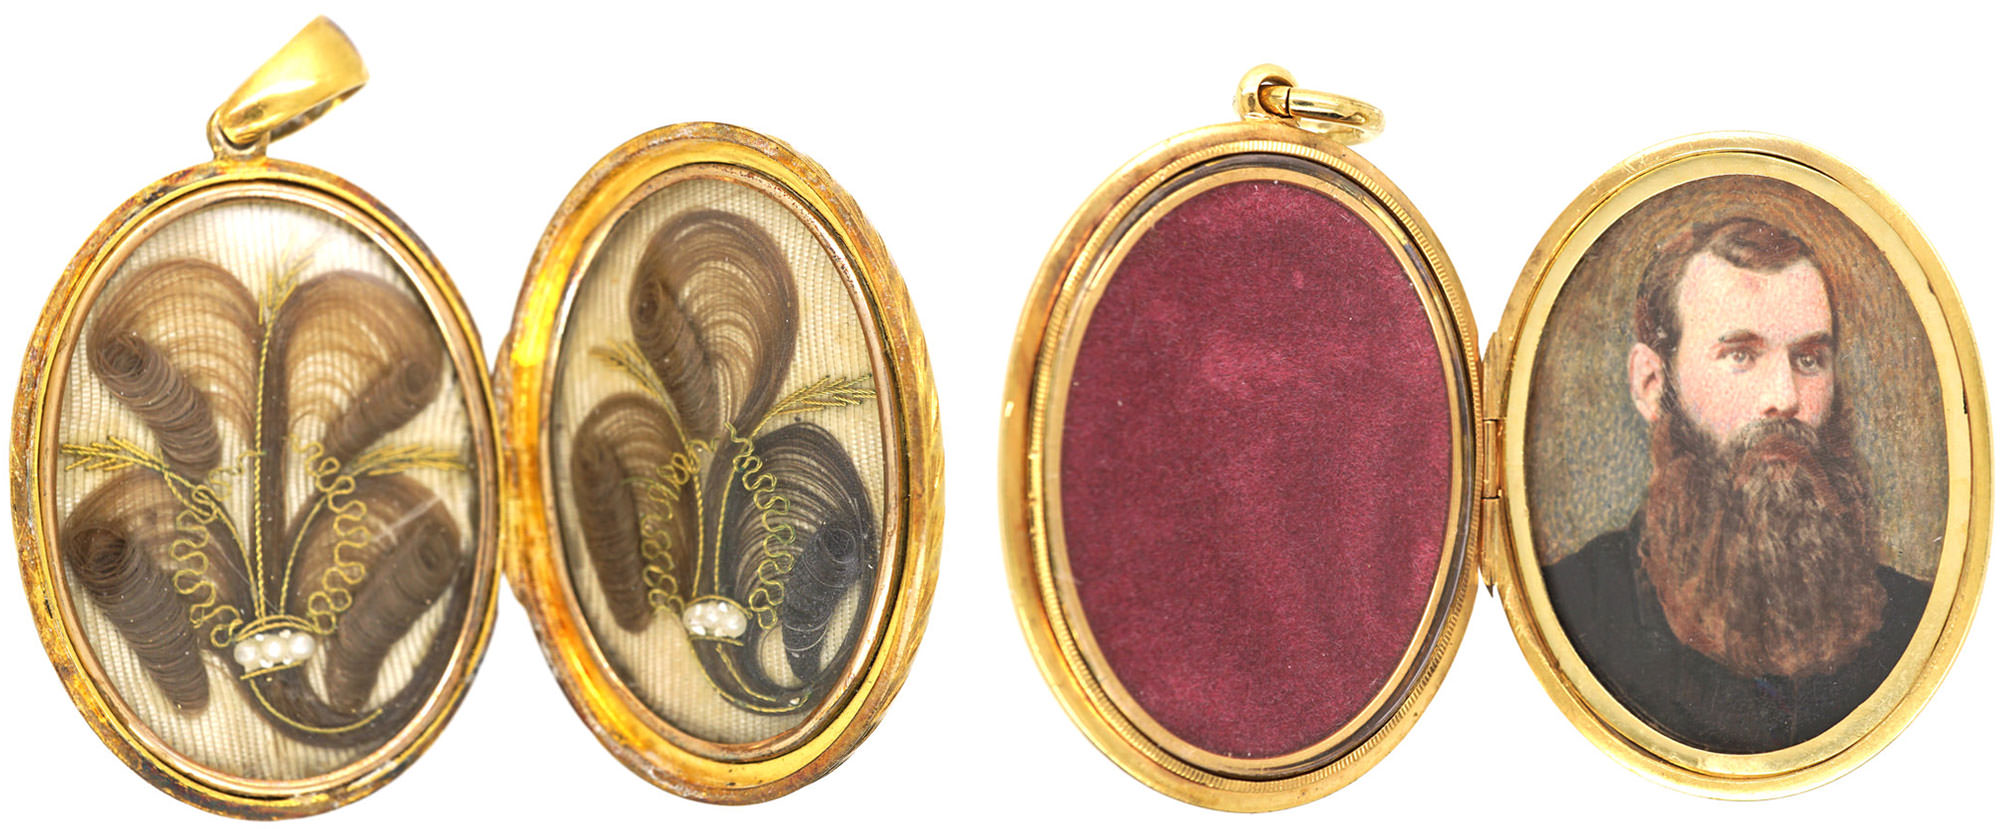 Locks of hair and a lover's portrait can be found in lockets